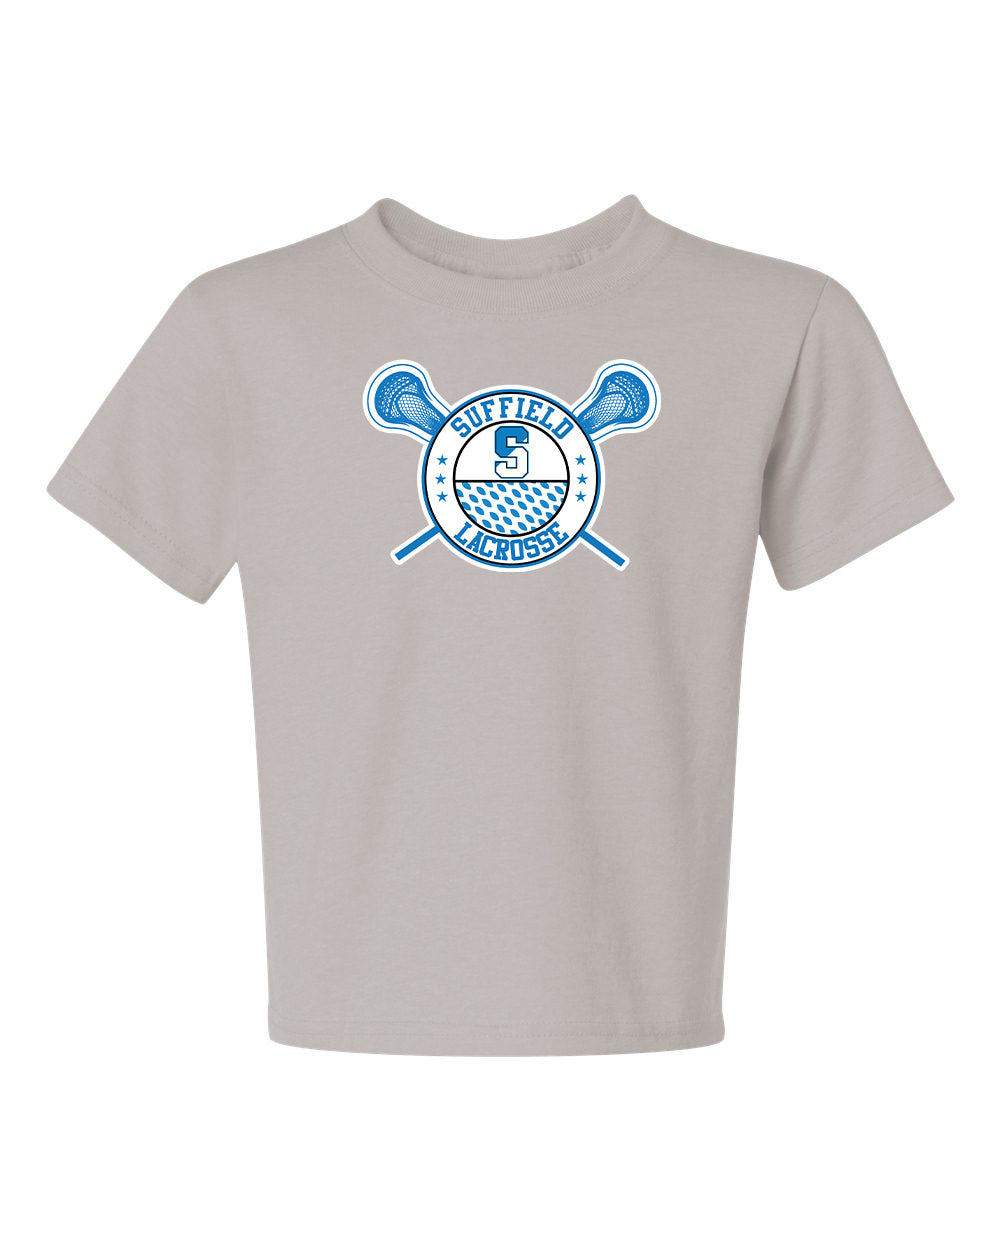 Suffield Youth Lacrosse Tee "Circle" - 29B (color options available)